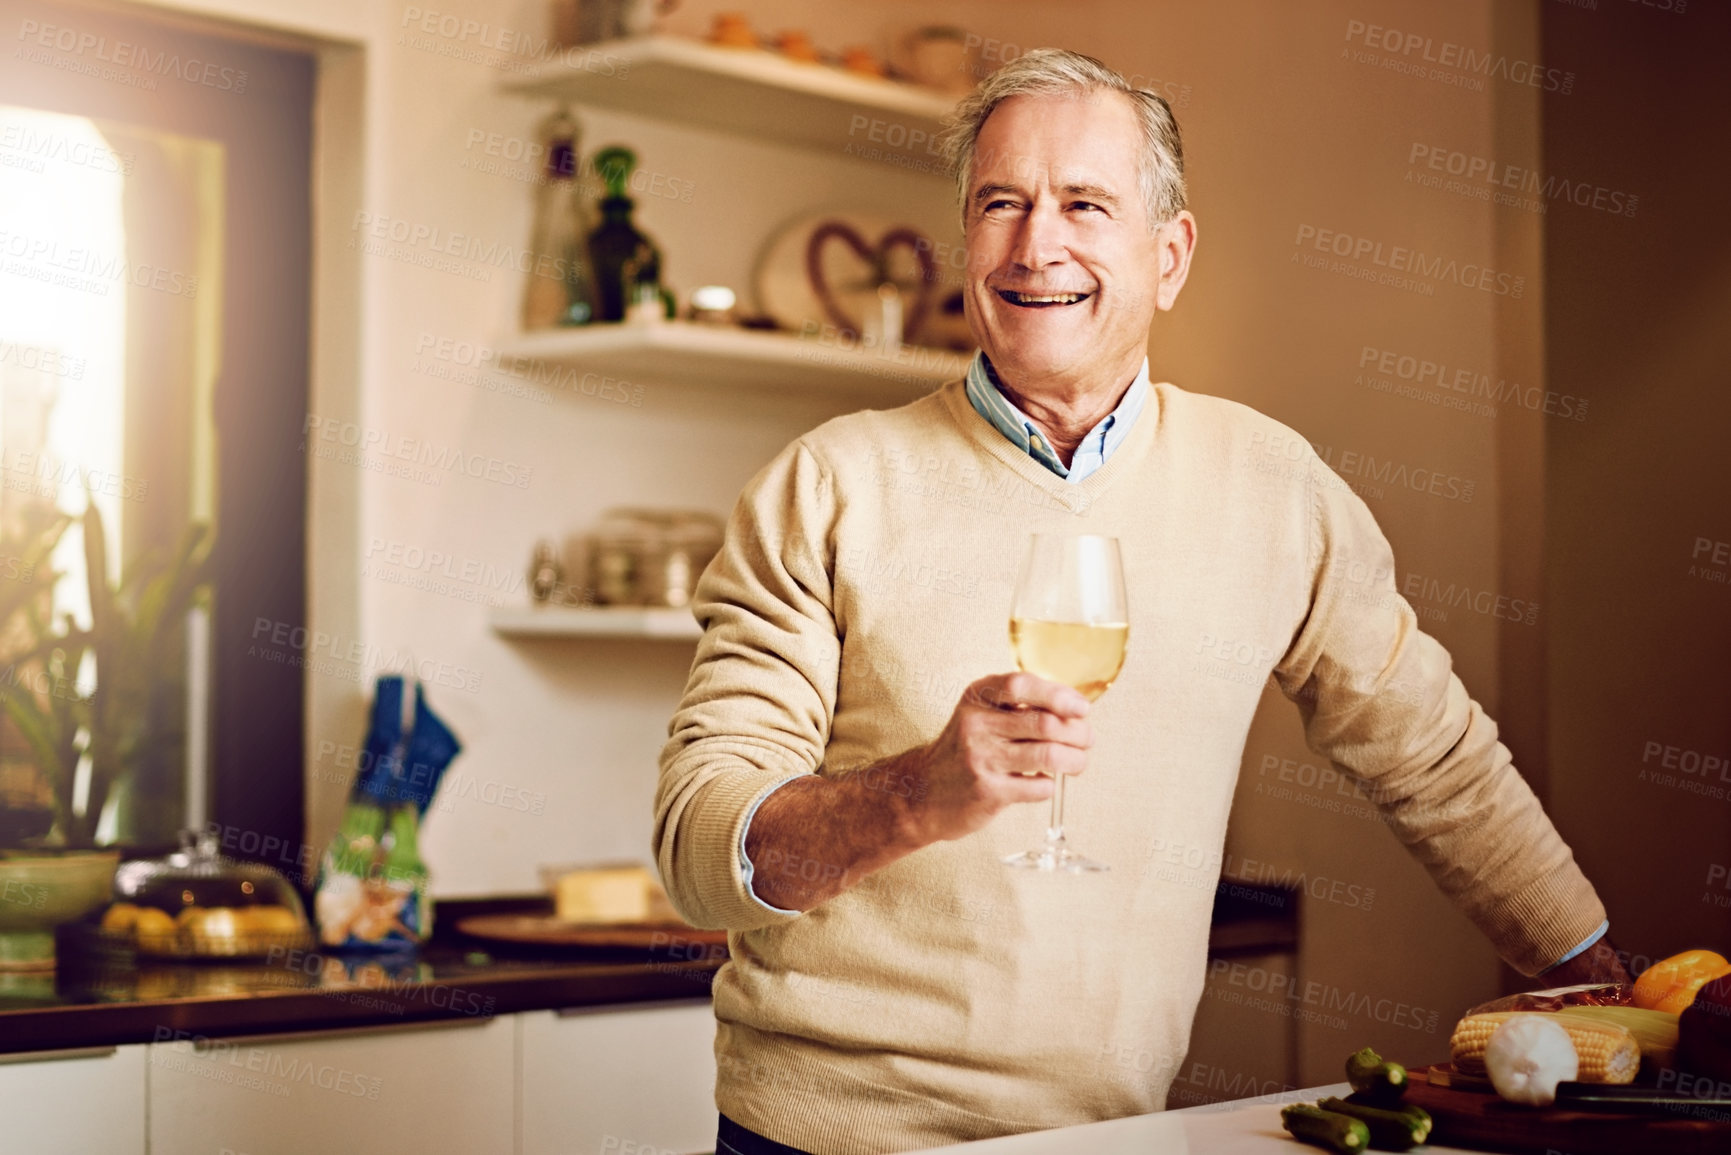 Buy stock photo Shot of a senior man enjoying a glass of wine while preparing dinner in his kitchen